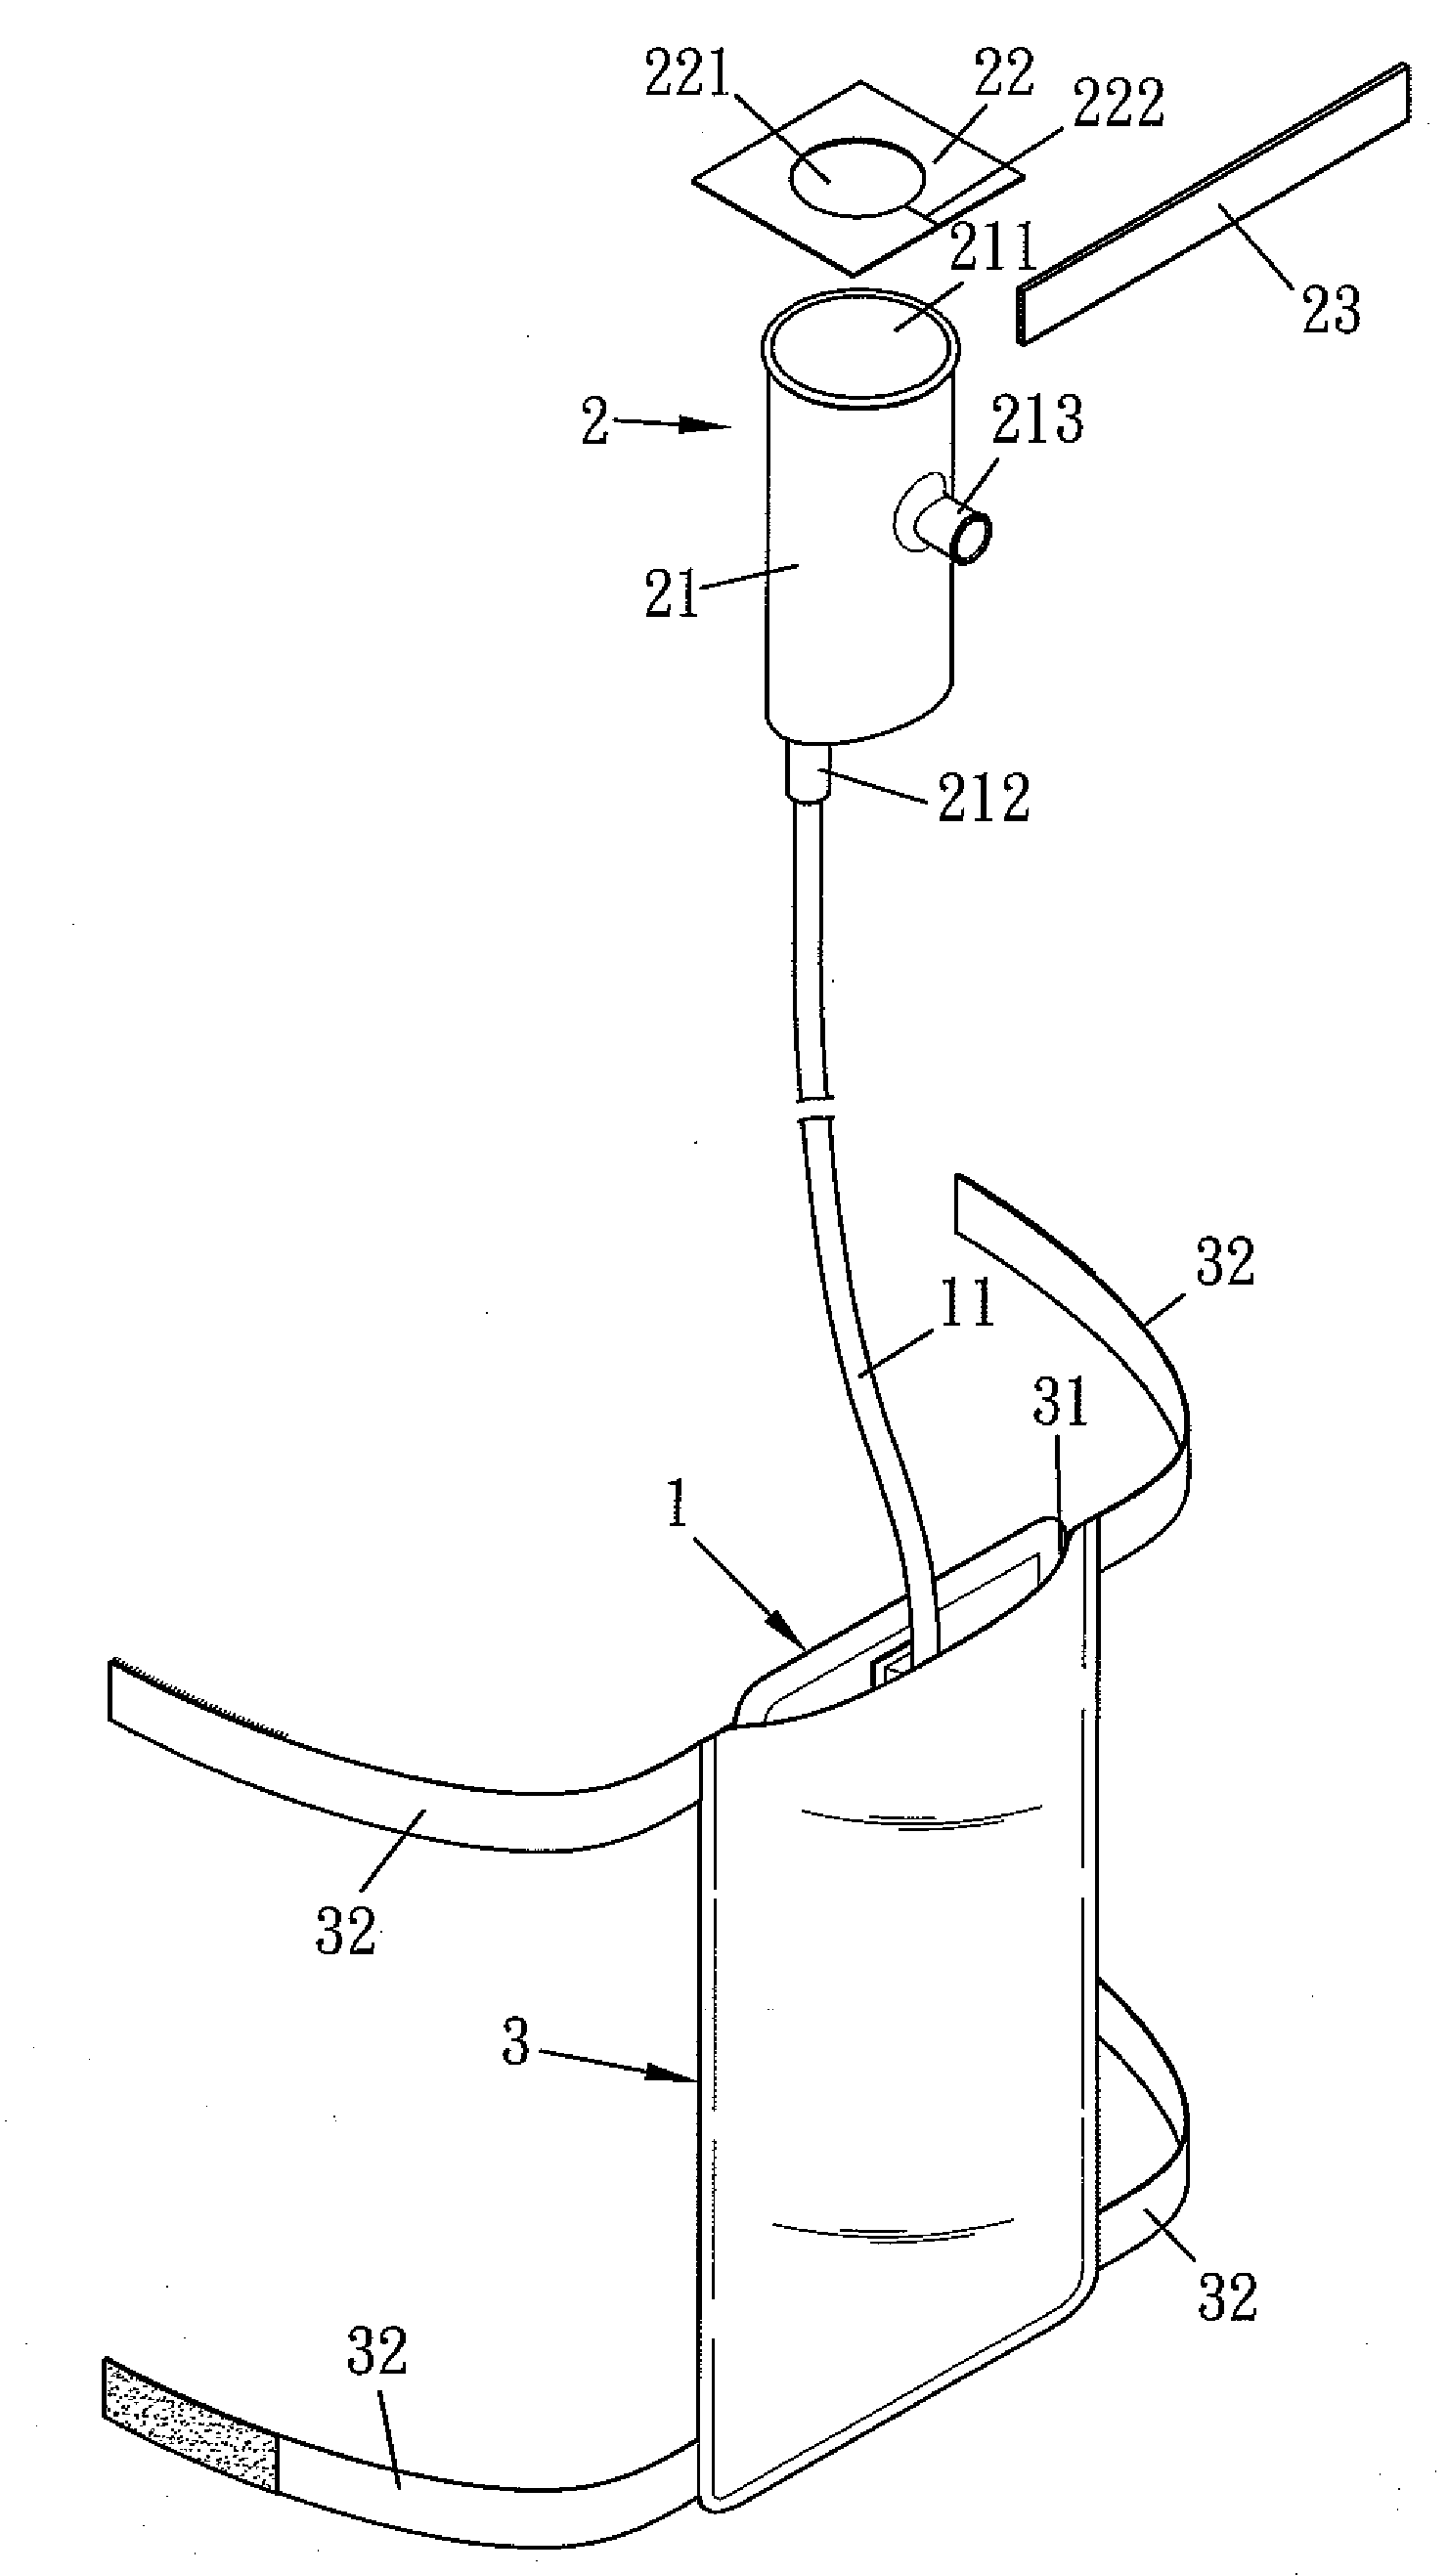 Catheterization Device for a Urine Bag